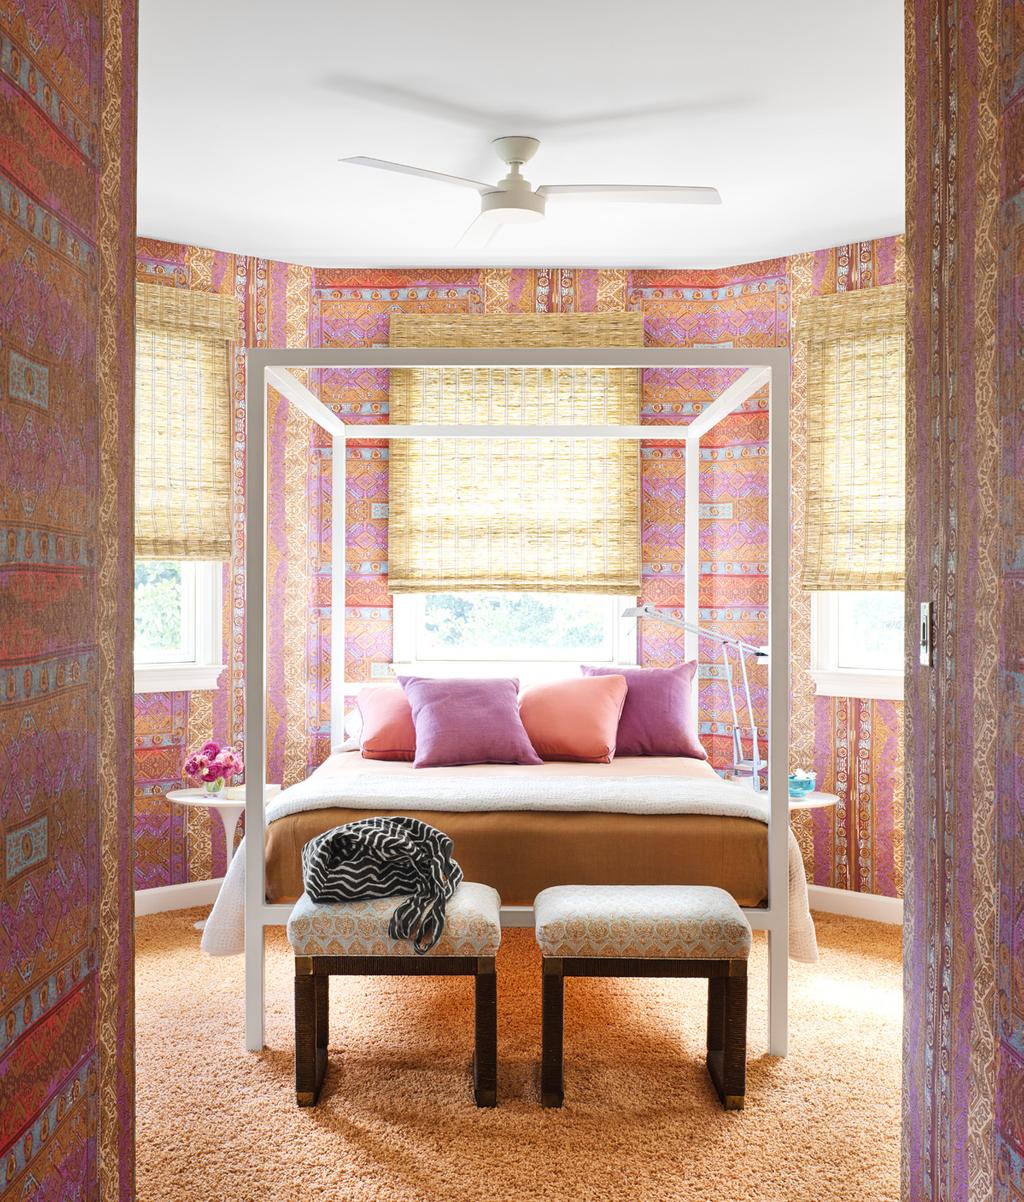 To soften the edges of an octagonal bedroom, Hranowsky chose a bold Élitis wall paper.